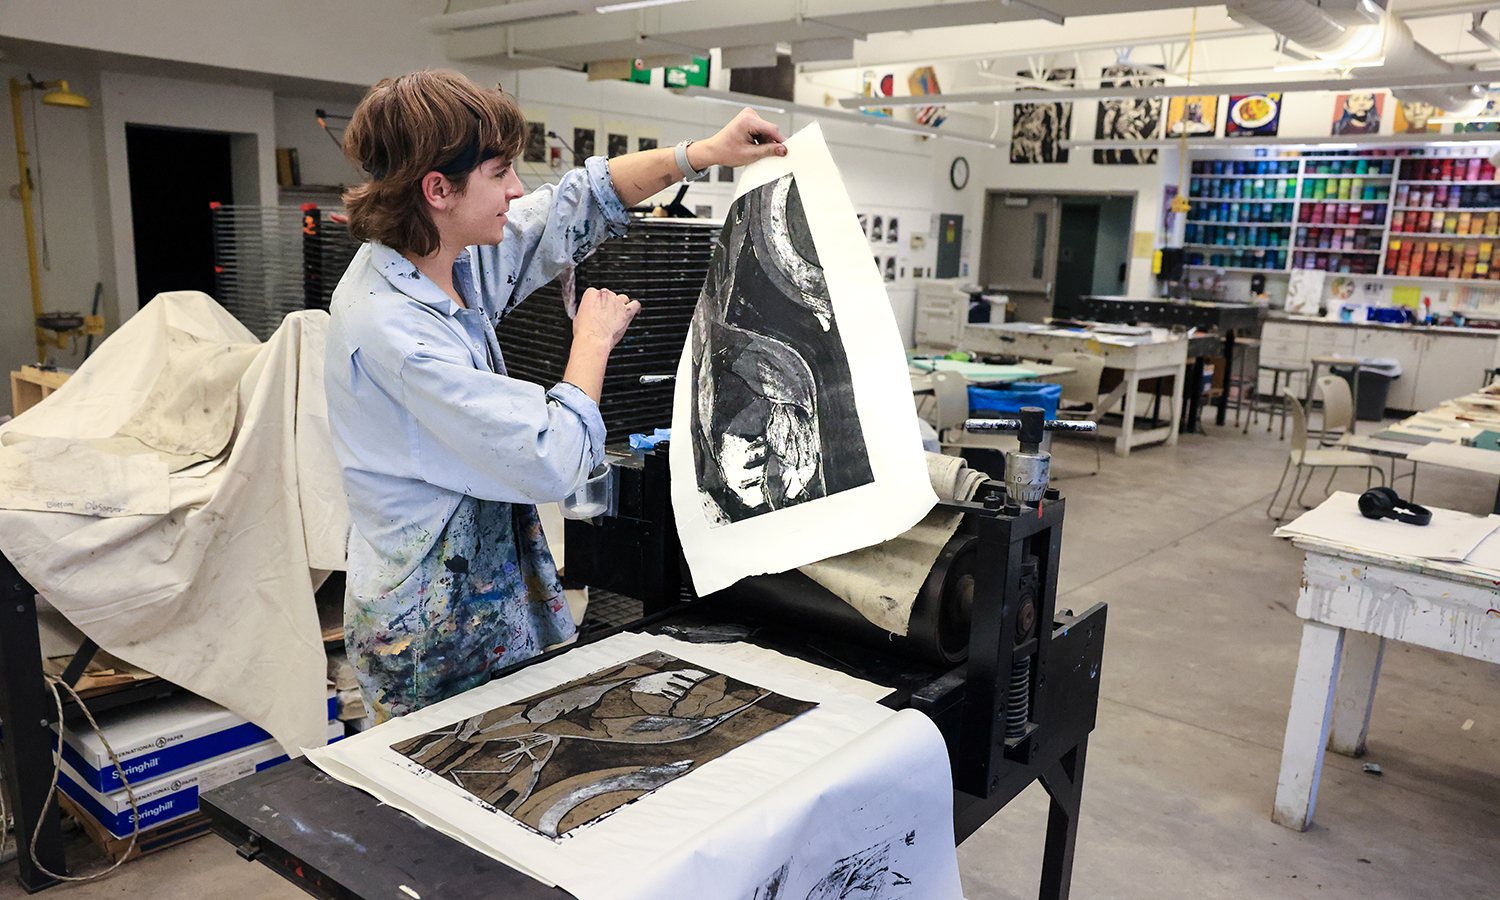 After running his print through the press, Jake Wright ’23 removes his design from the printing plate at the Katherine D. Elliott Studio Arts Center.